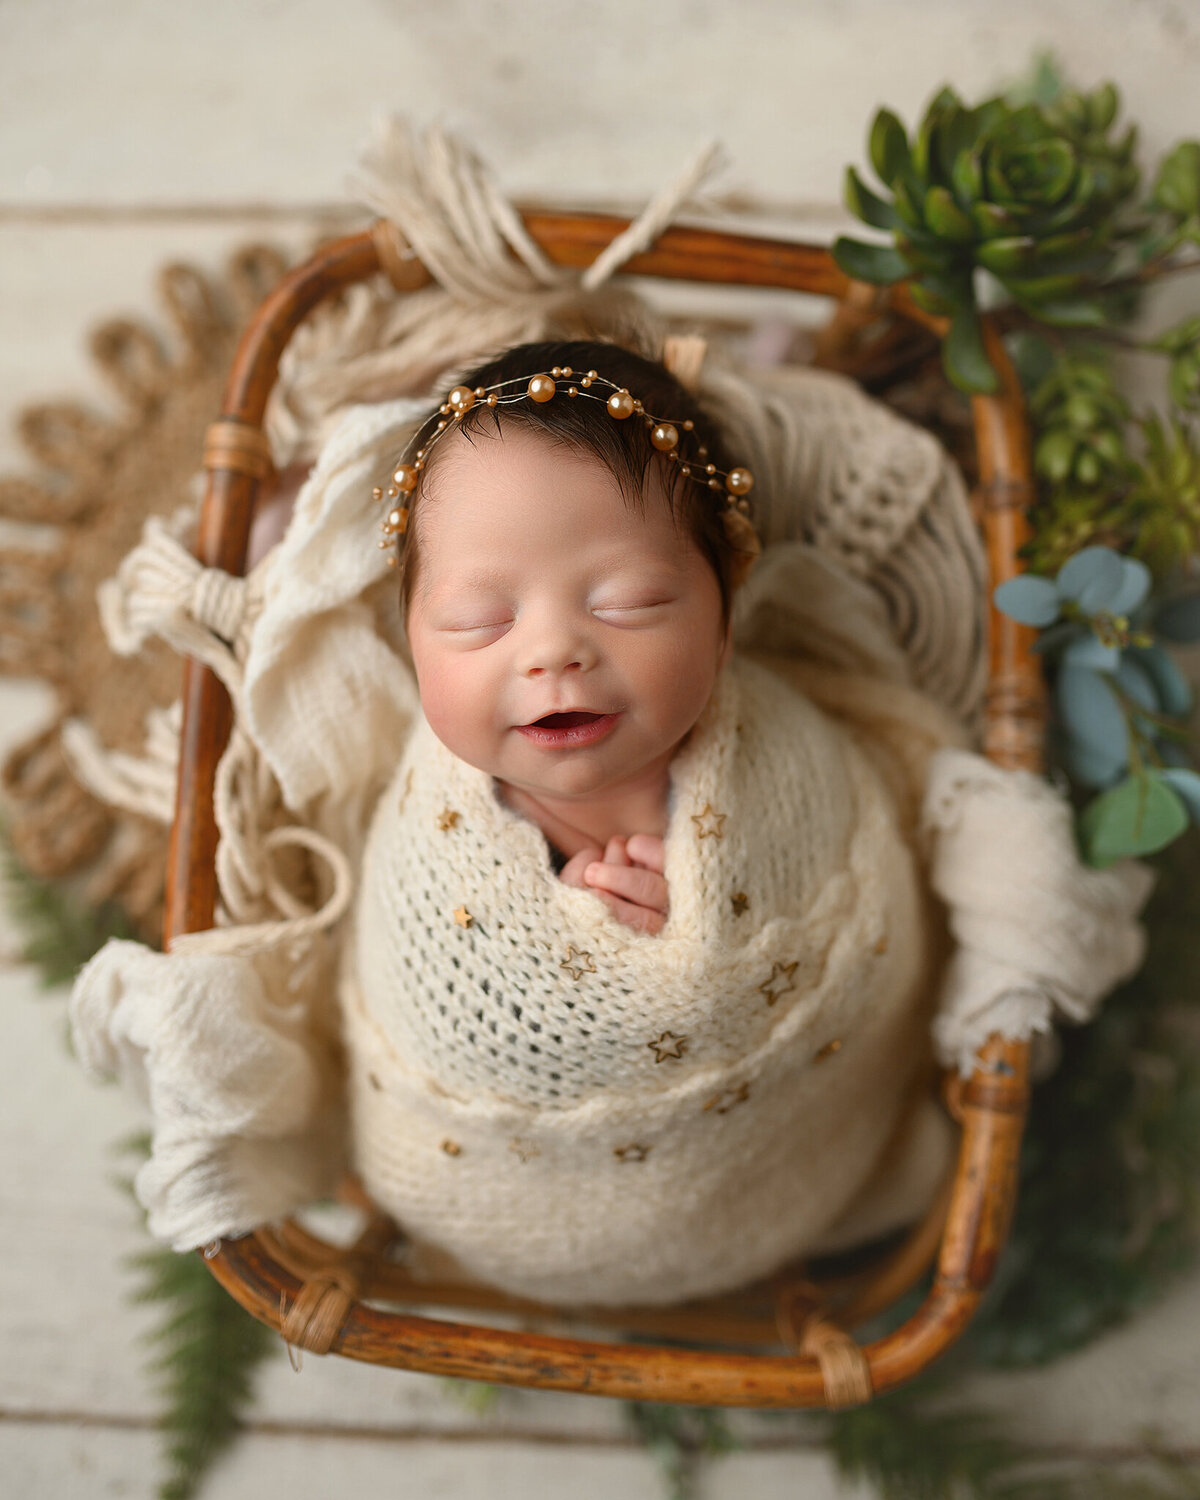 adorable baby girl with dark hair, smiling swaddled in soft yellow wrap, in a bamboo basket with succulents around her